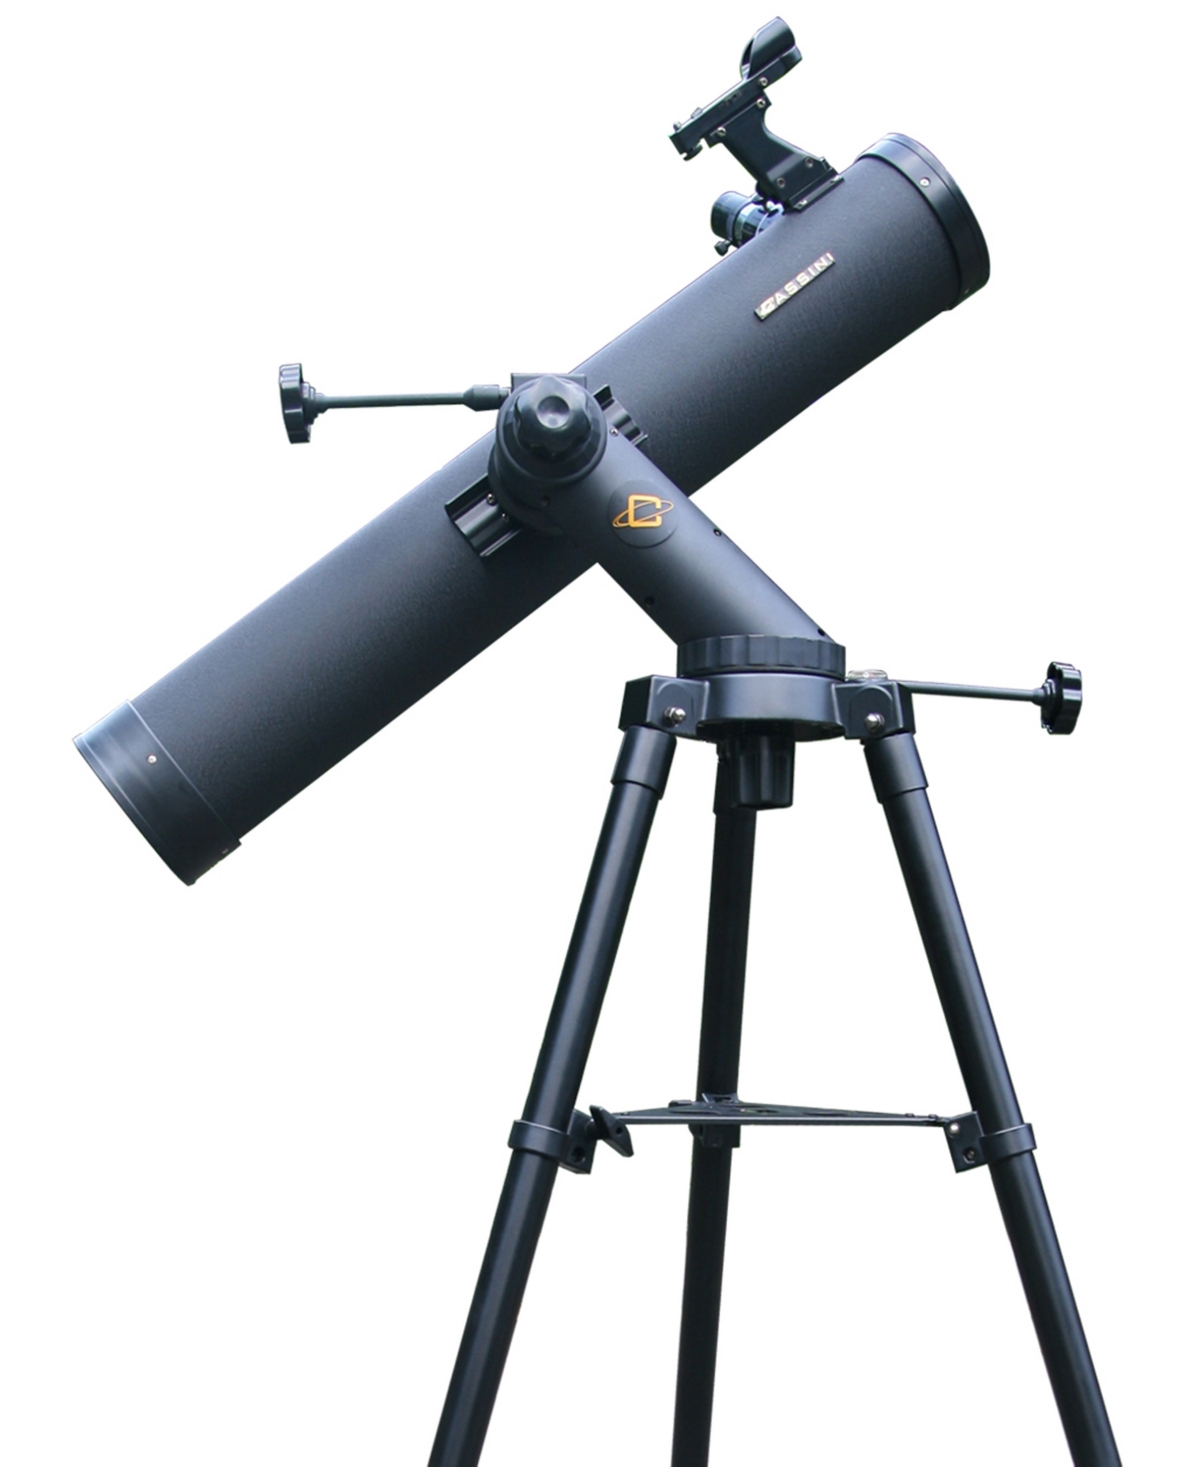 Shop Cassini 1100mm X 102mm Astronomical Tracker Mount Telescope Kit With Color Filter Wheel In Black